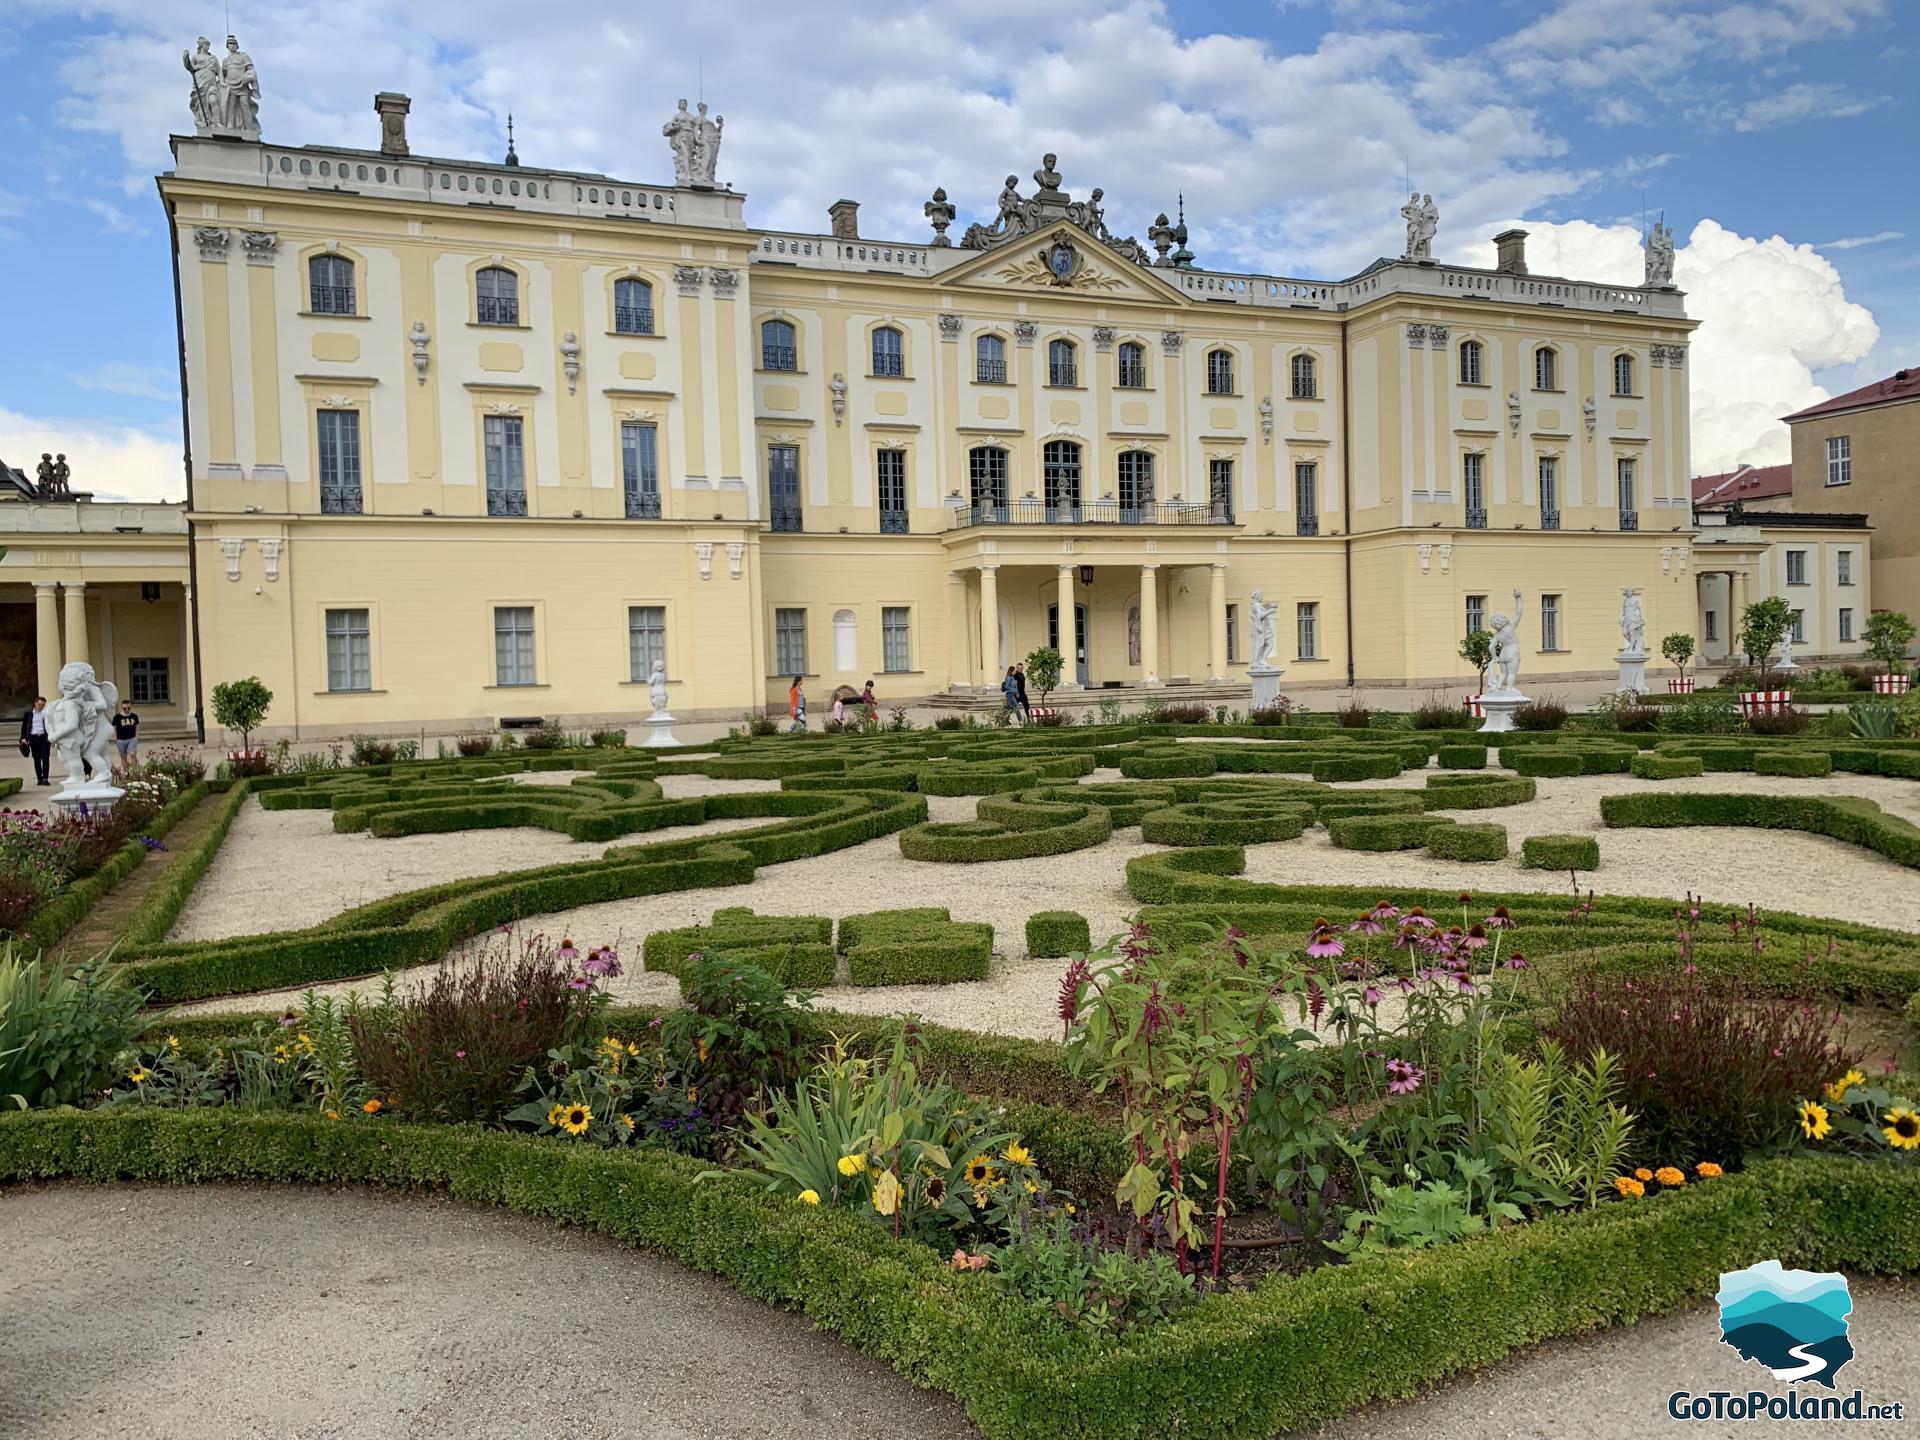 a French-style garden in front of the palace